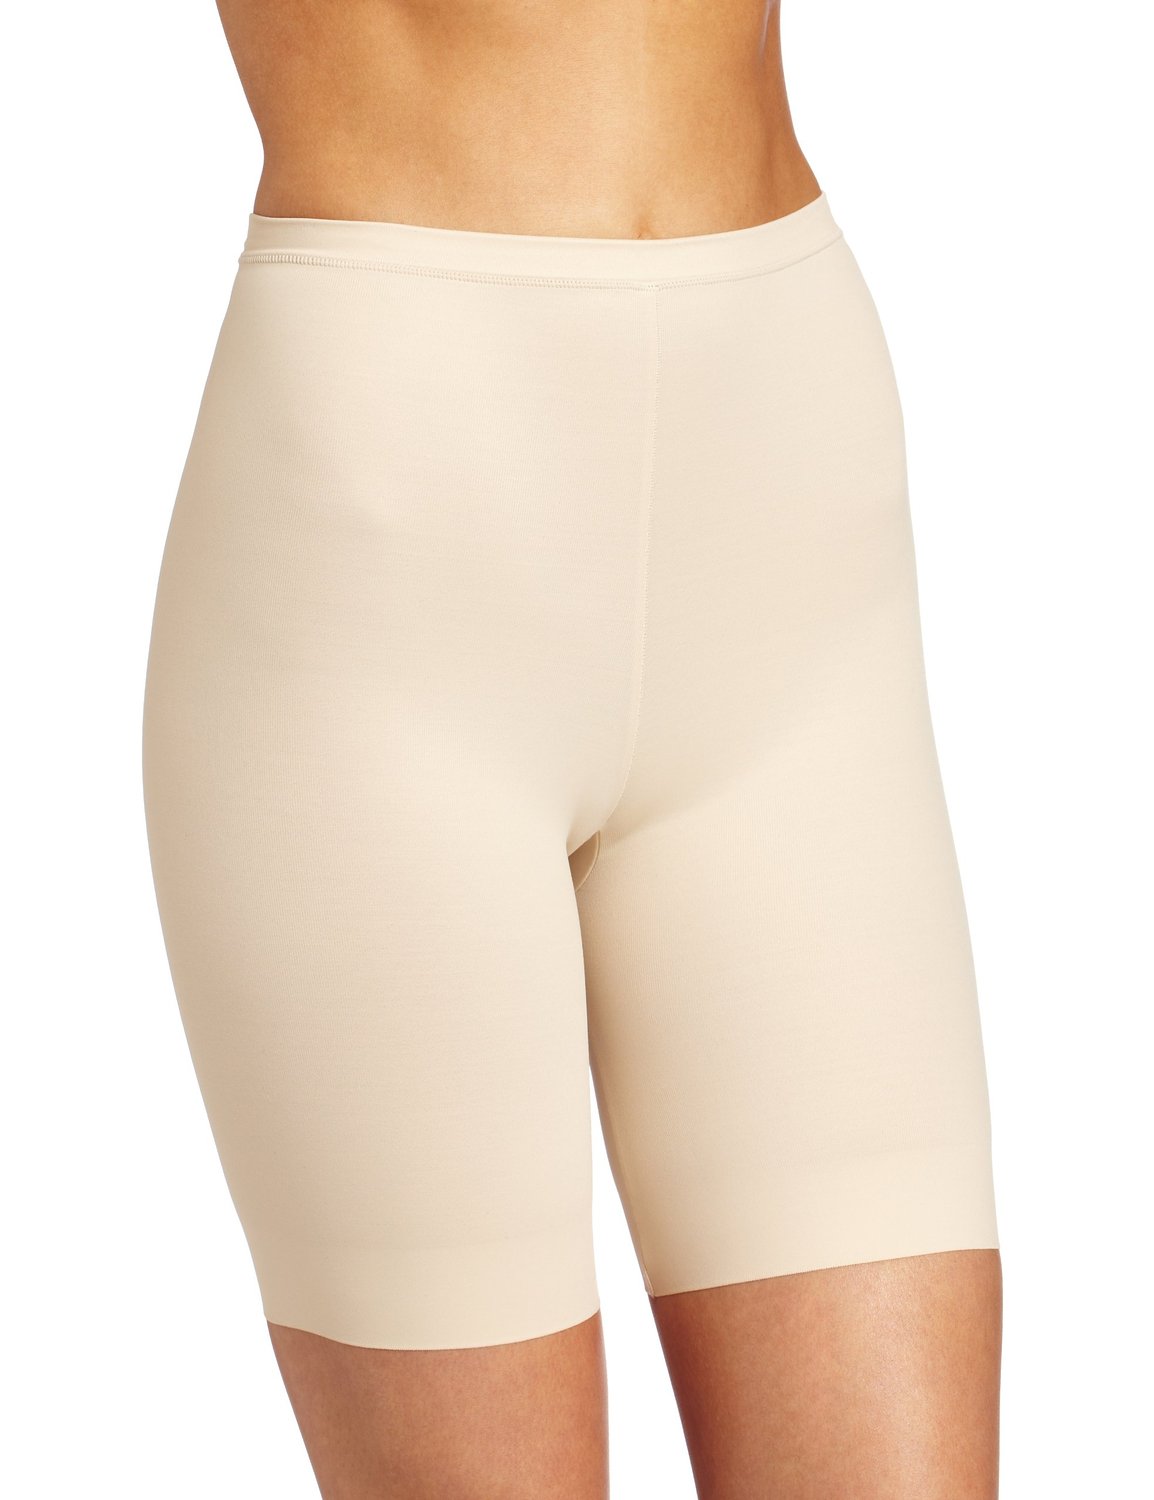 1355 - Flexees Women`s Adjusts To Me Thigh Slimmer